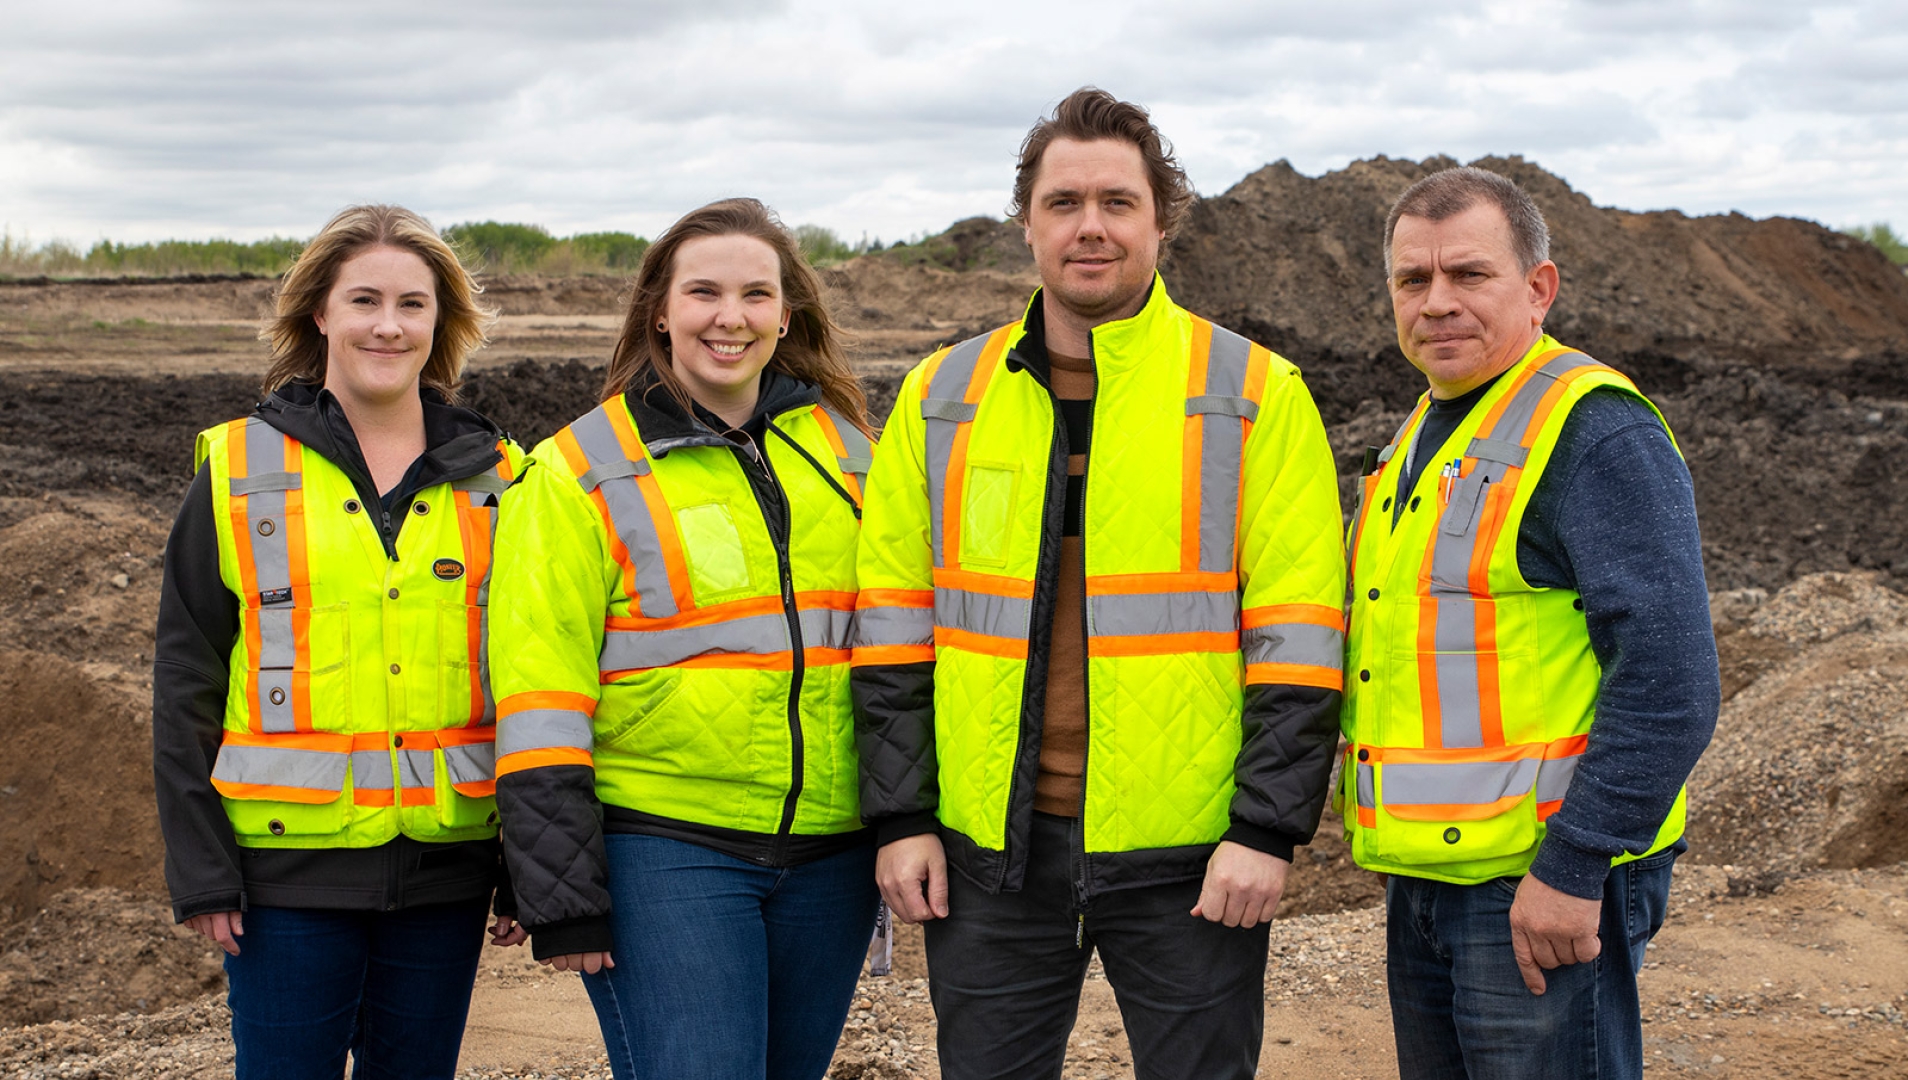 Four civil technician students in reflective vests standing together with mountains of dirt behind them.